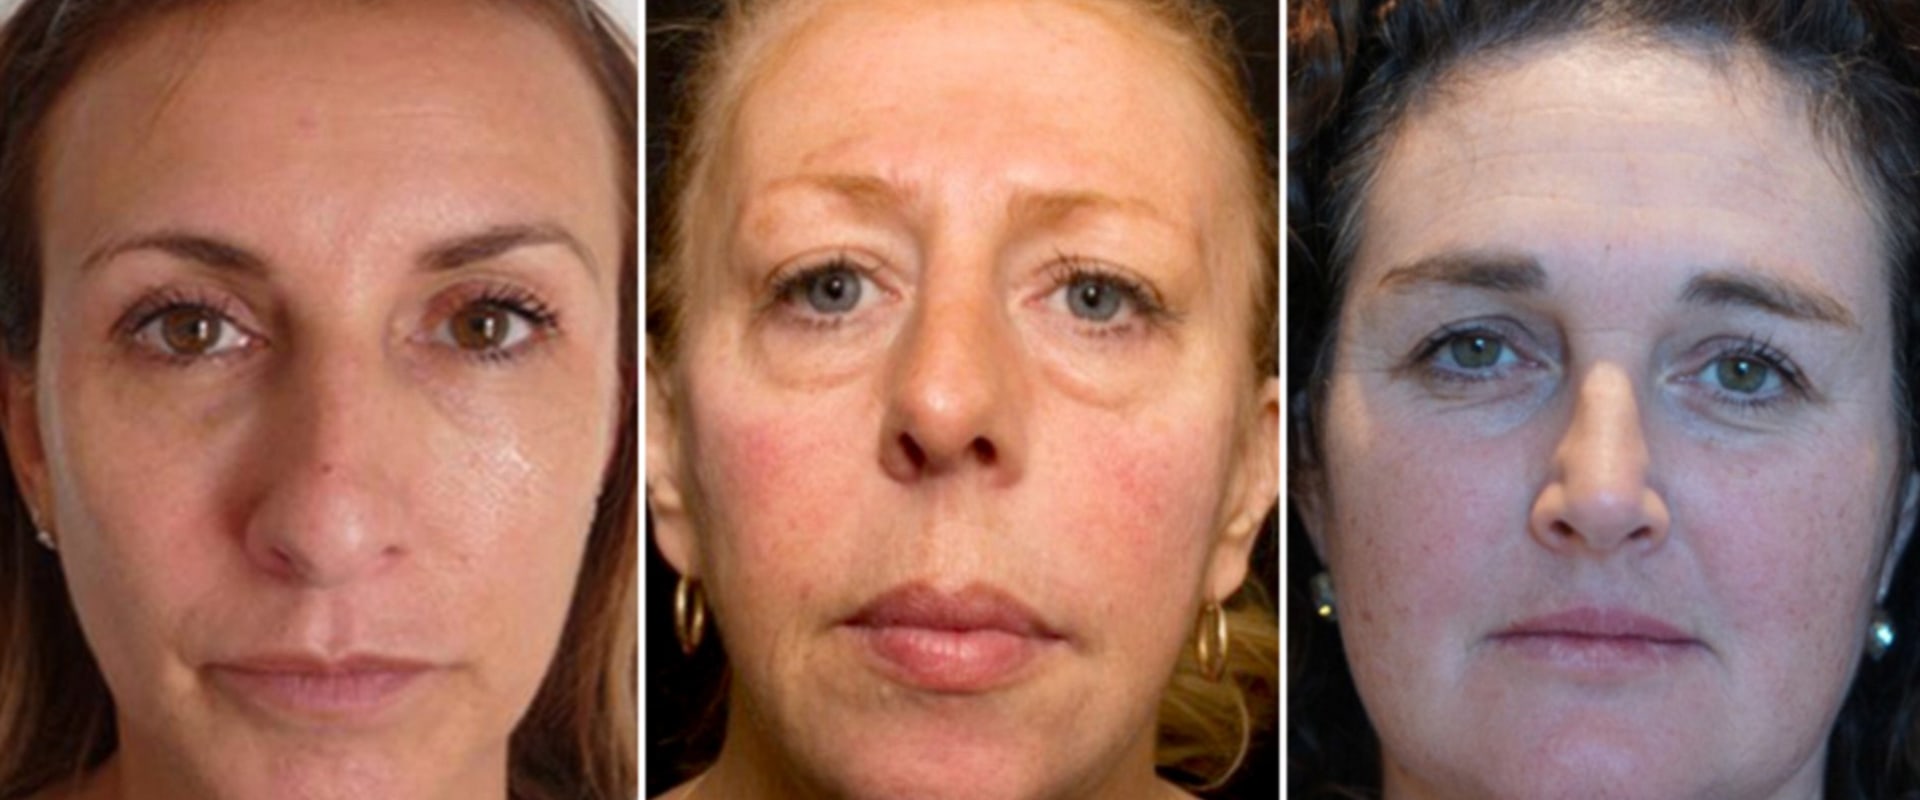 What Happens to Dermal Fillers After Years of Use?